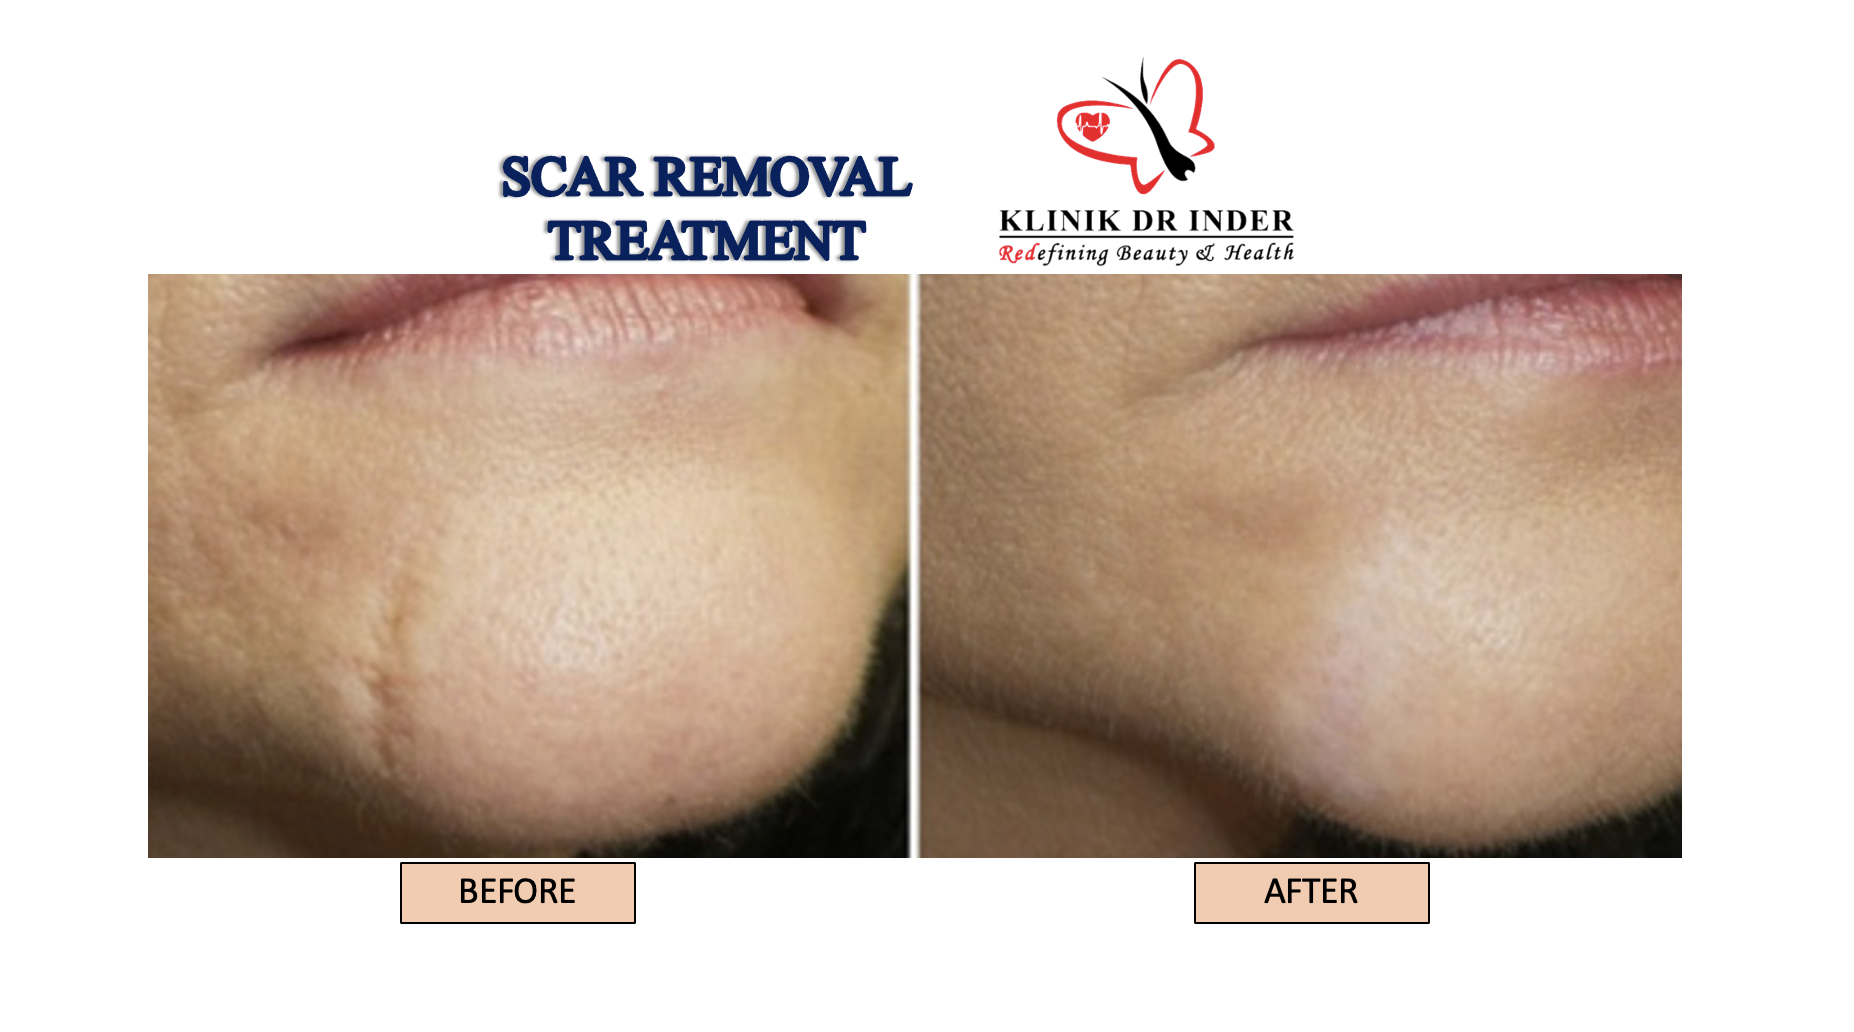 Laser Scar Removal Scar Removal Treatment Aesthetic Clinic 7547